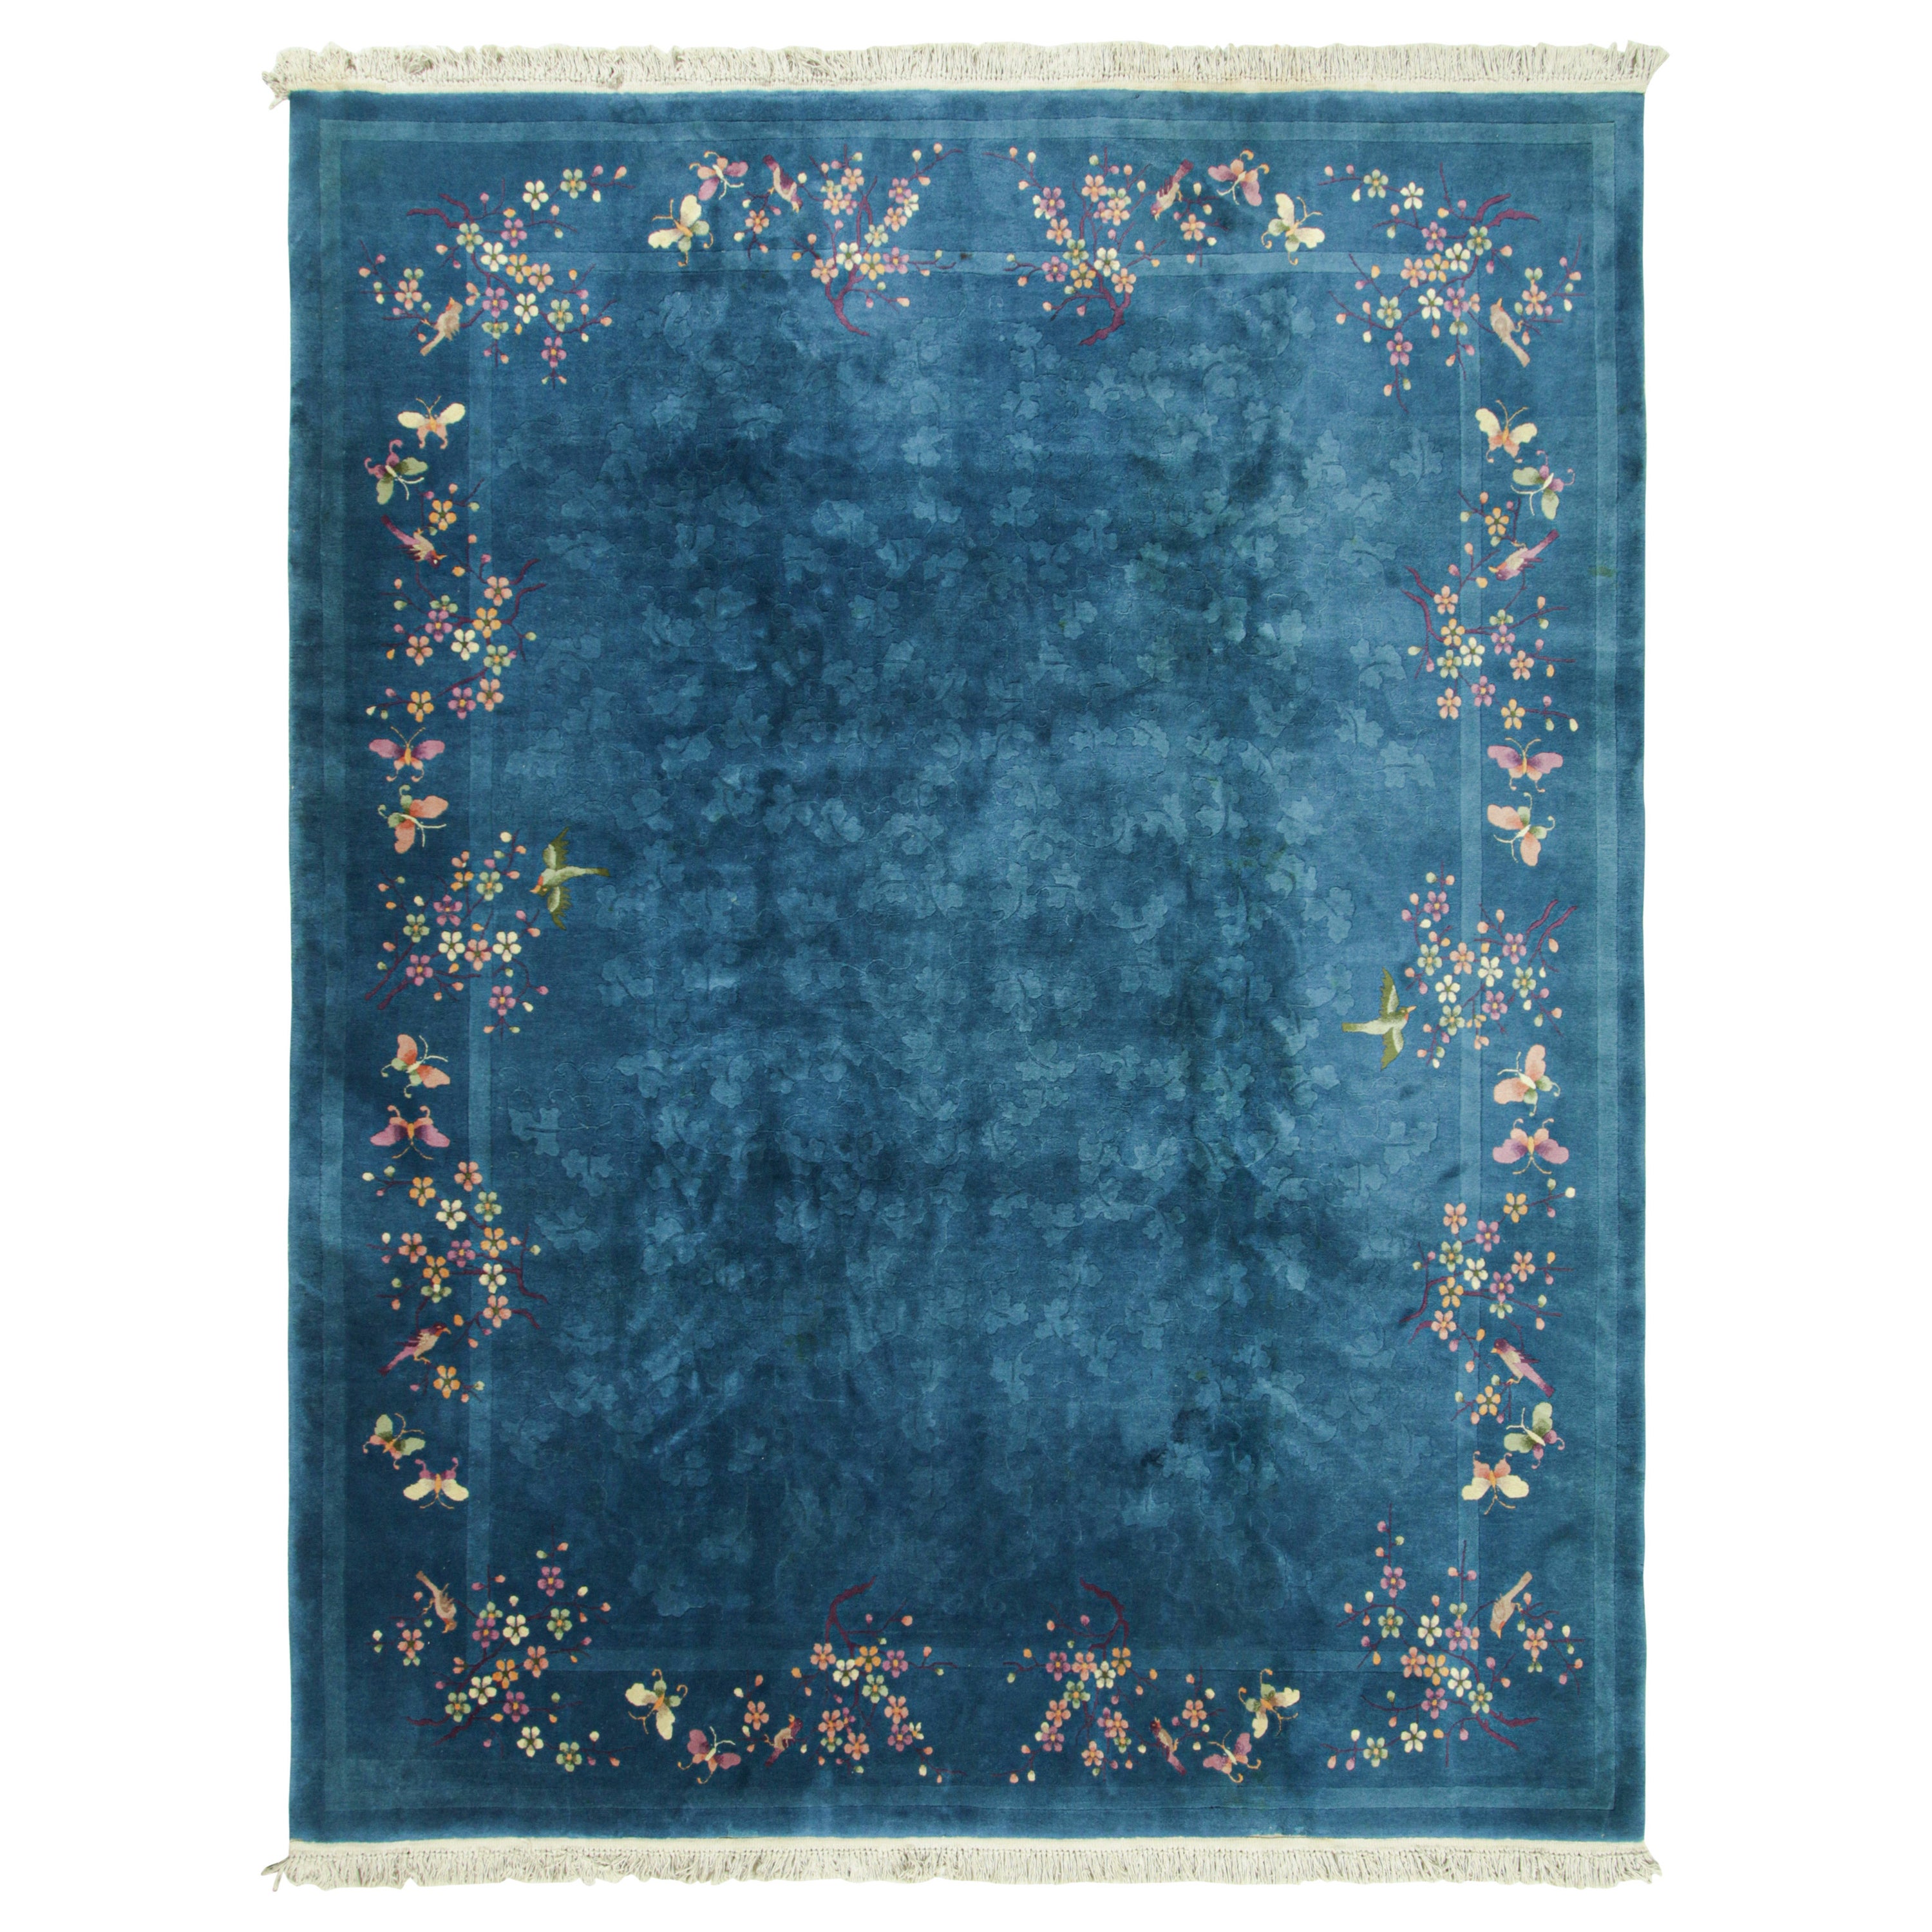 Antique Chinese Art Deco Rug in Blue with Floral Patterns, from Rug & Kilim For Sale